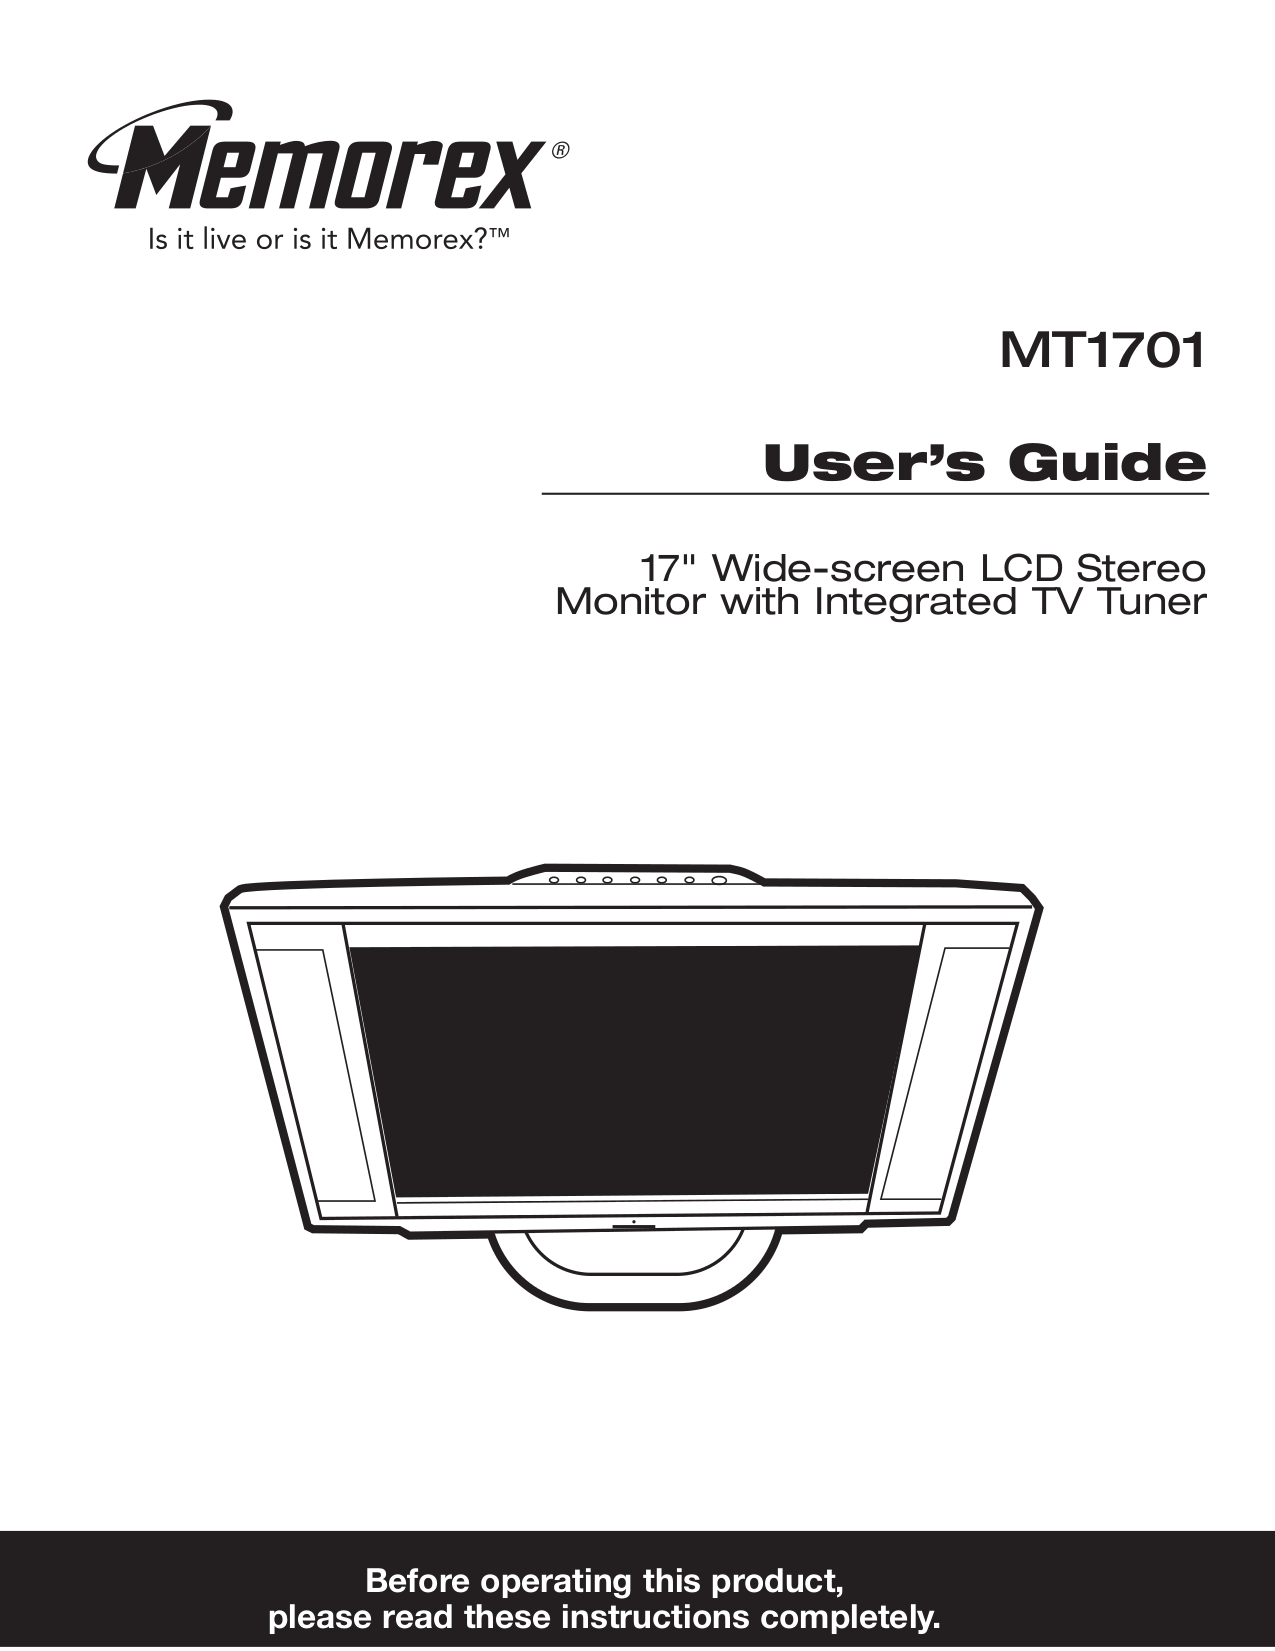 Where can you download a Memorex manual?